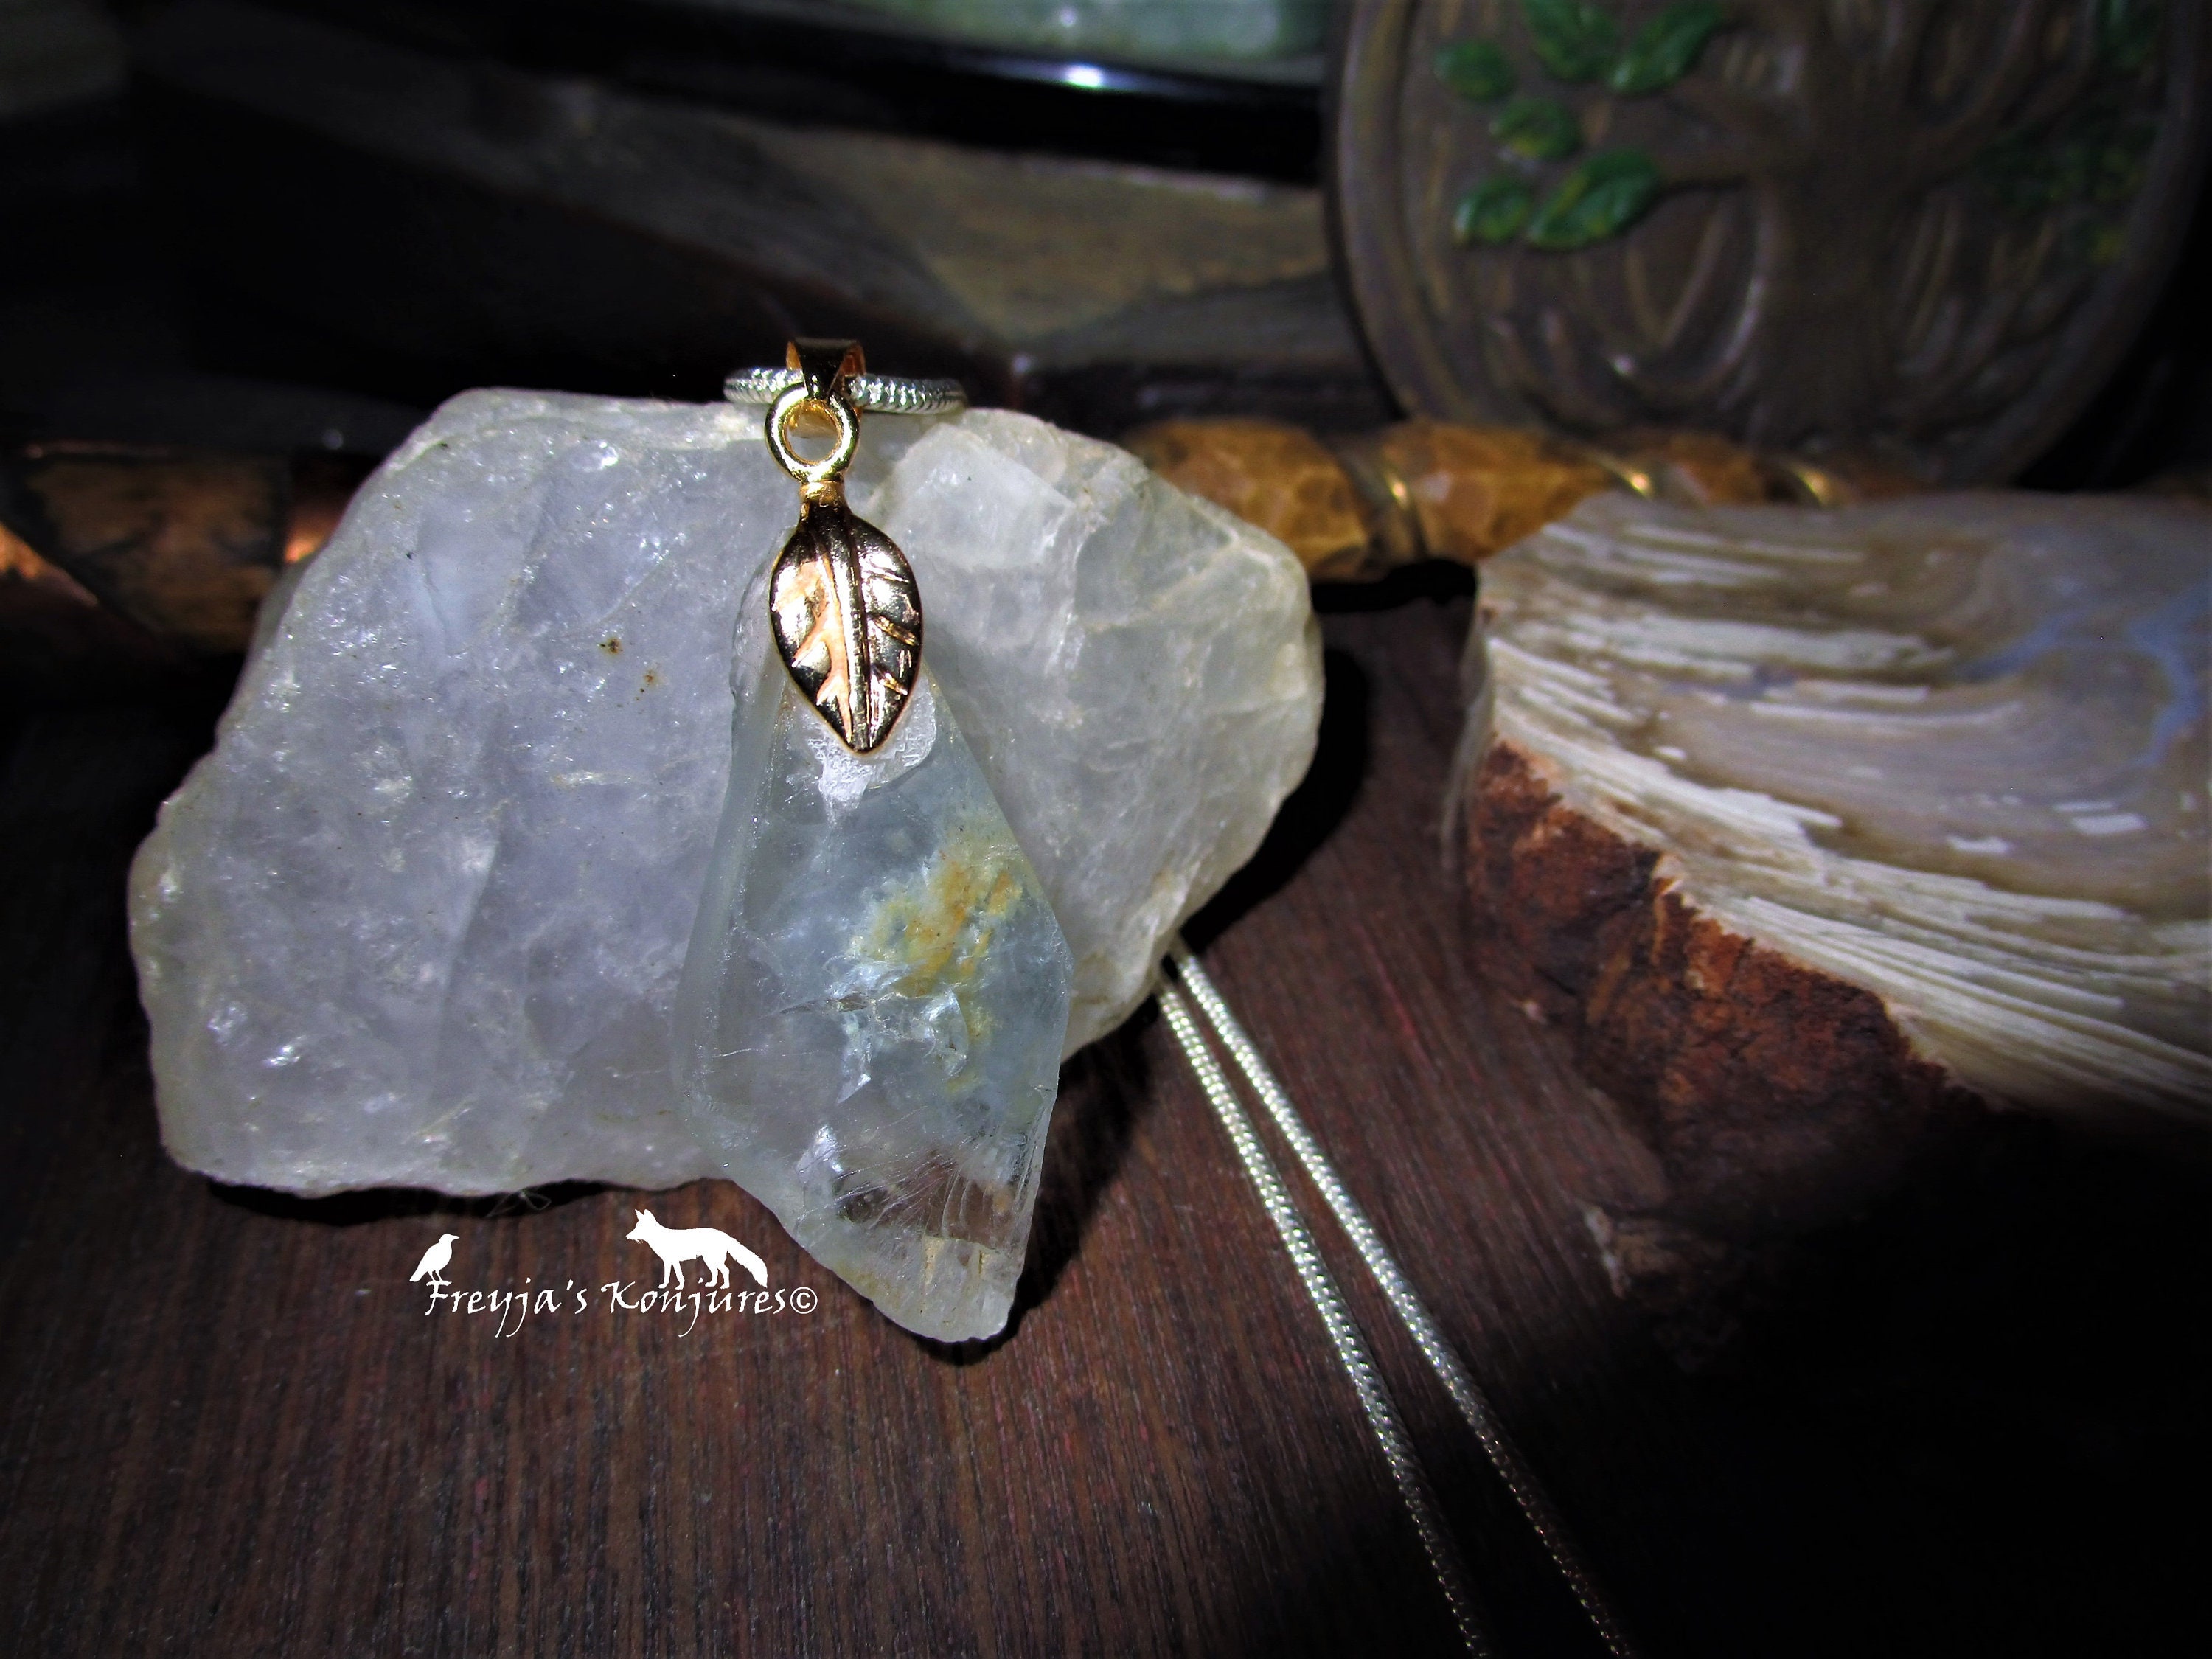 Clear Topaz Necklace for Manifesting Health | Gemisphere CTZ6 6018 / 159.27 / 24